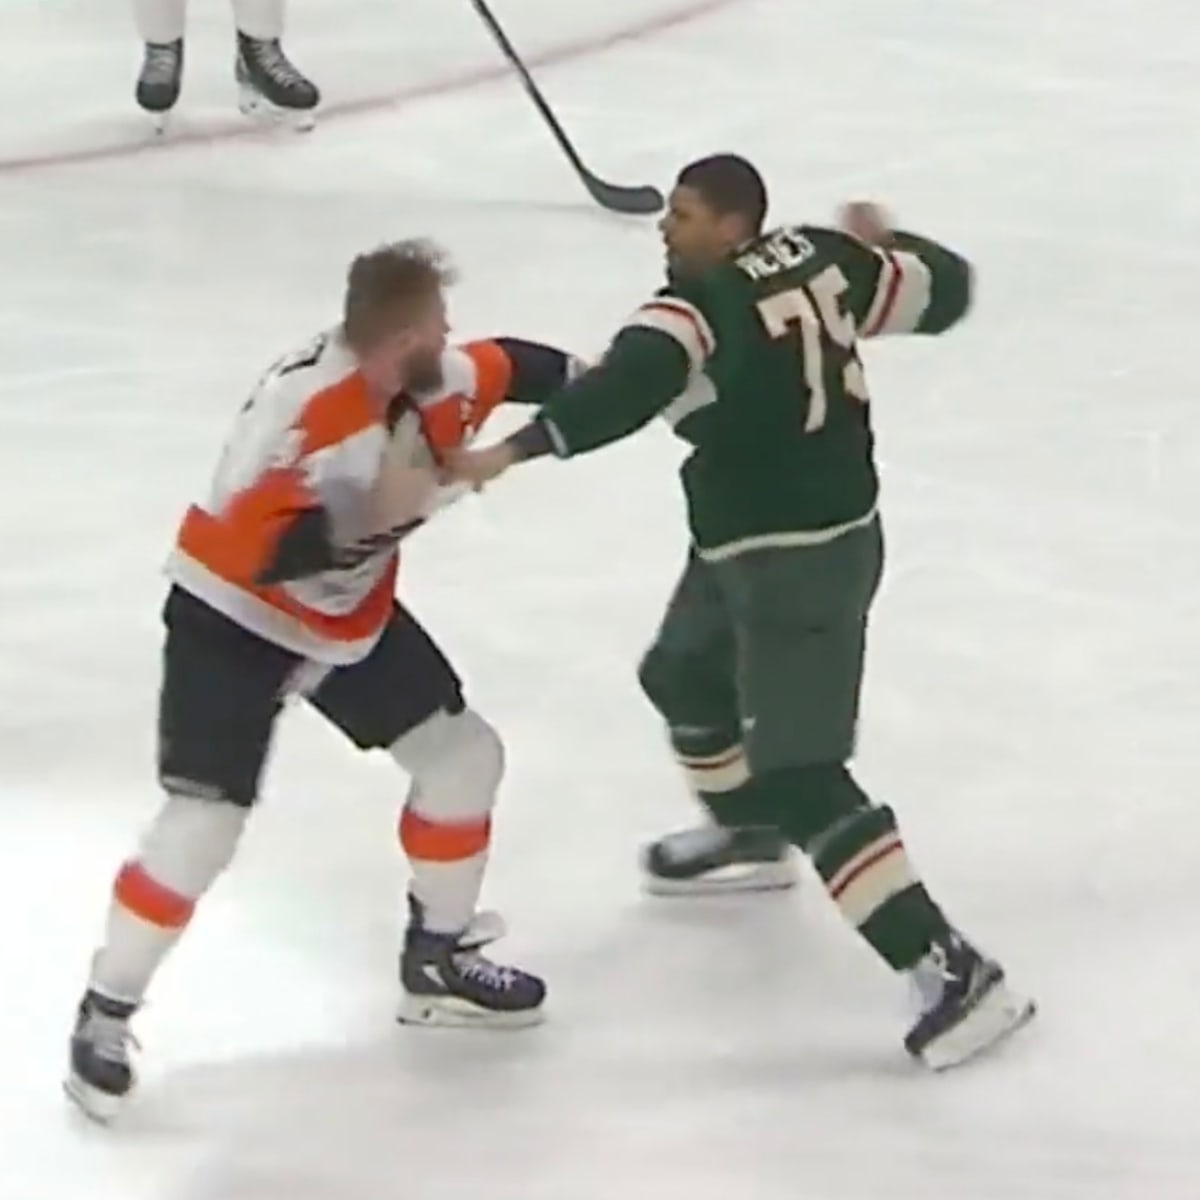 Watch Haymakers fly as Wild, Flyers fight 3 times in 15 seconds